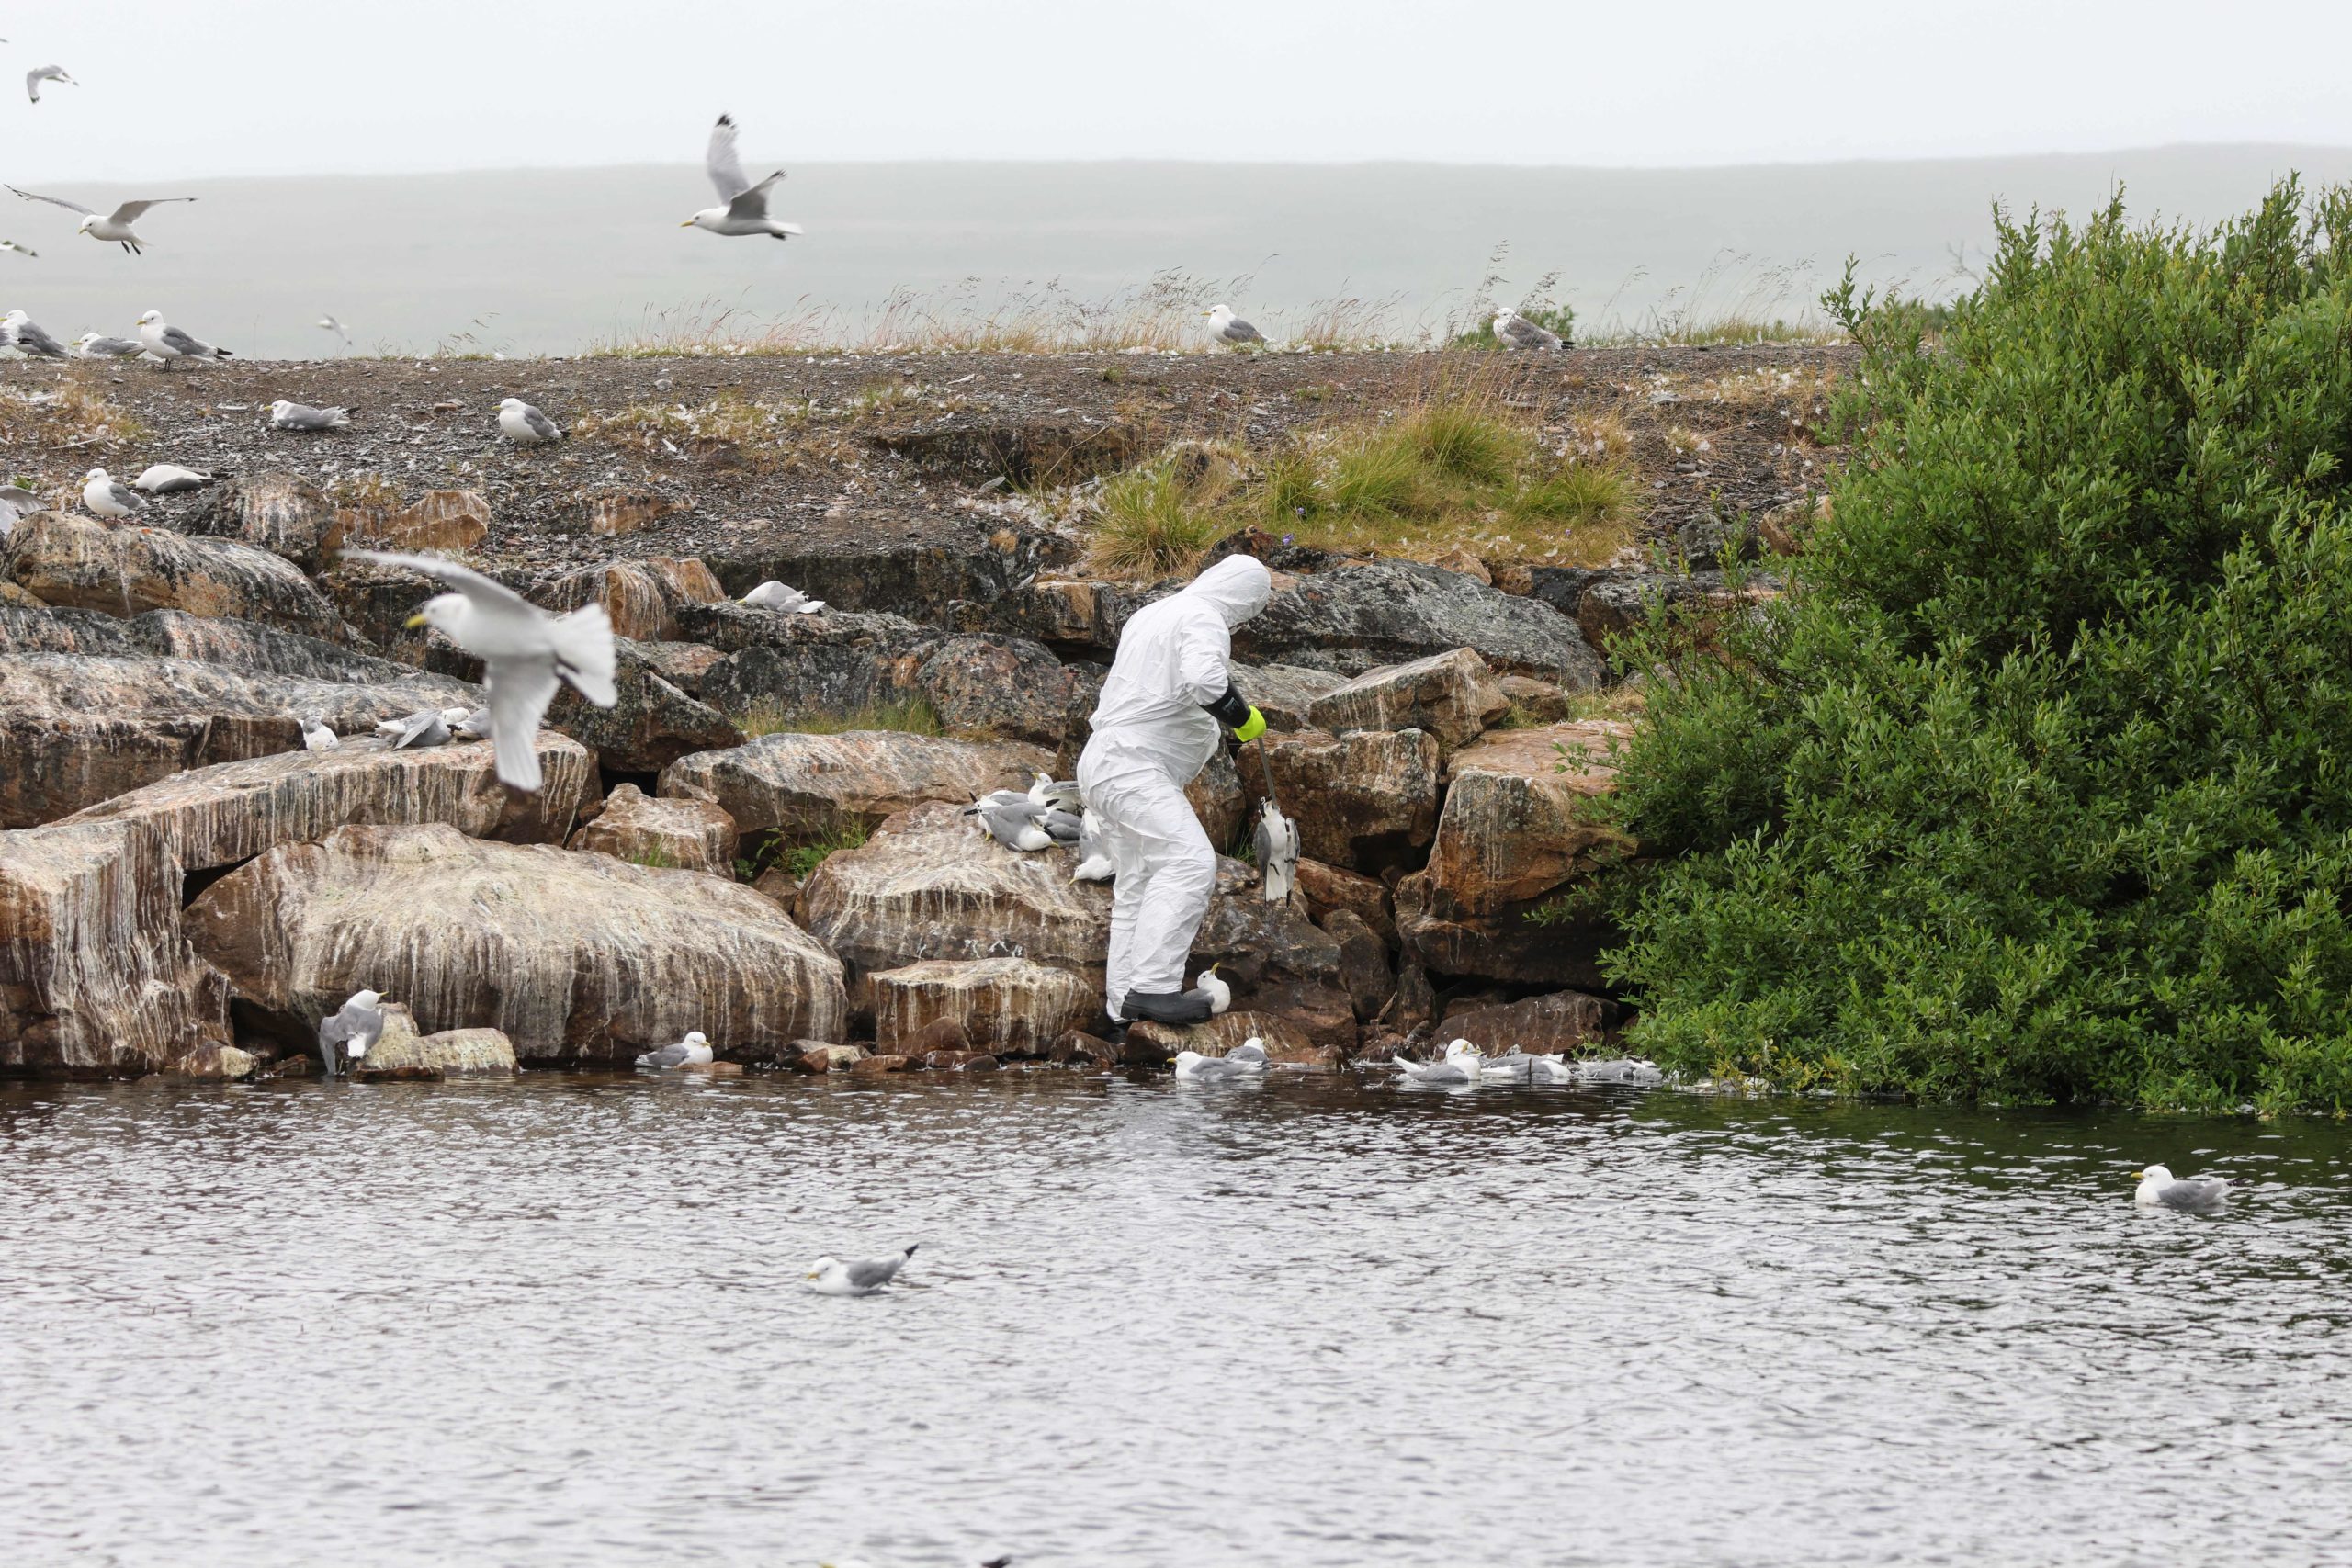 Dead birds are collected along the coast in the Vadso municipality of Finnmark in Norway following a major outbreak of bird flu on July 20, 2023. (Photo by YVIND ZAHL ARNTZEN/NTB/AFP via Getty Images)